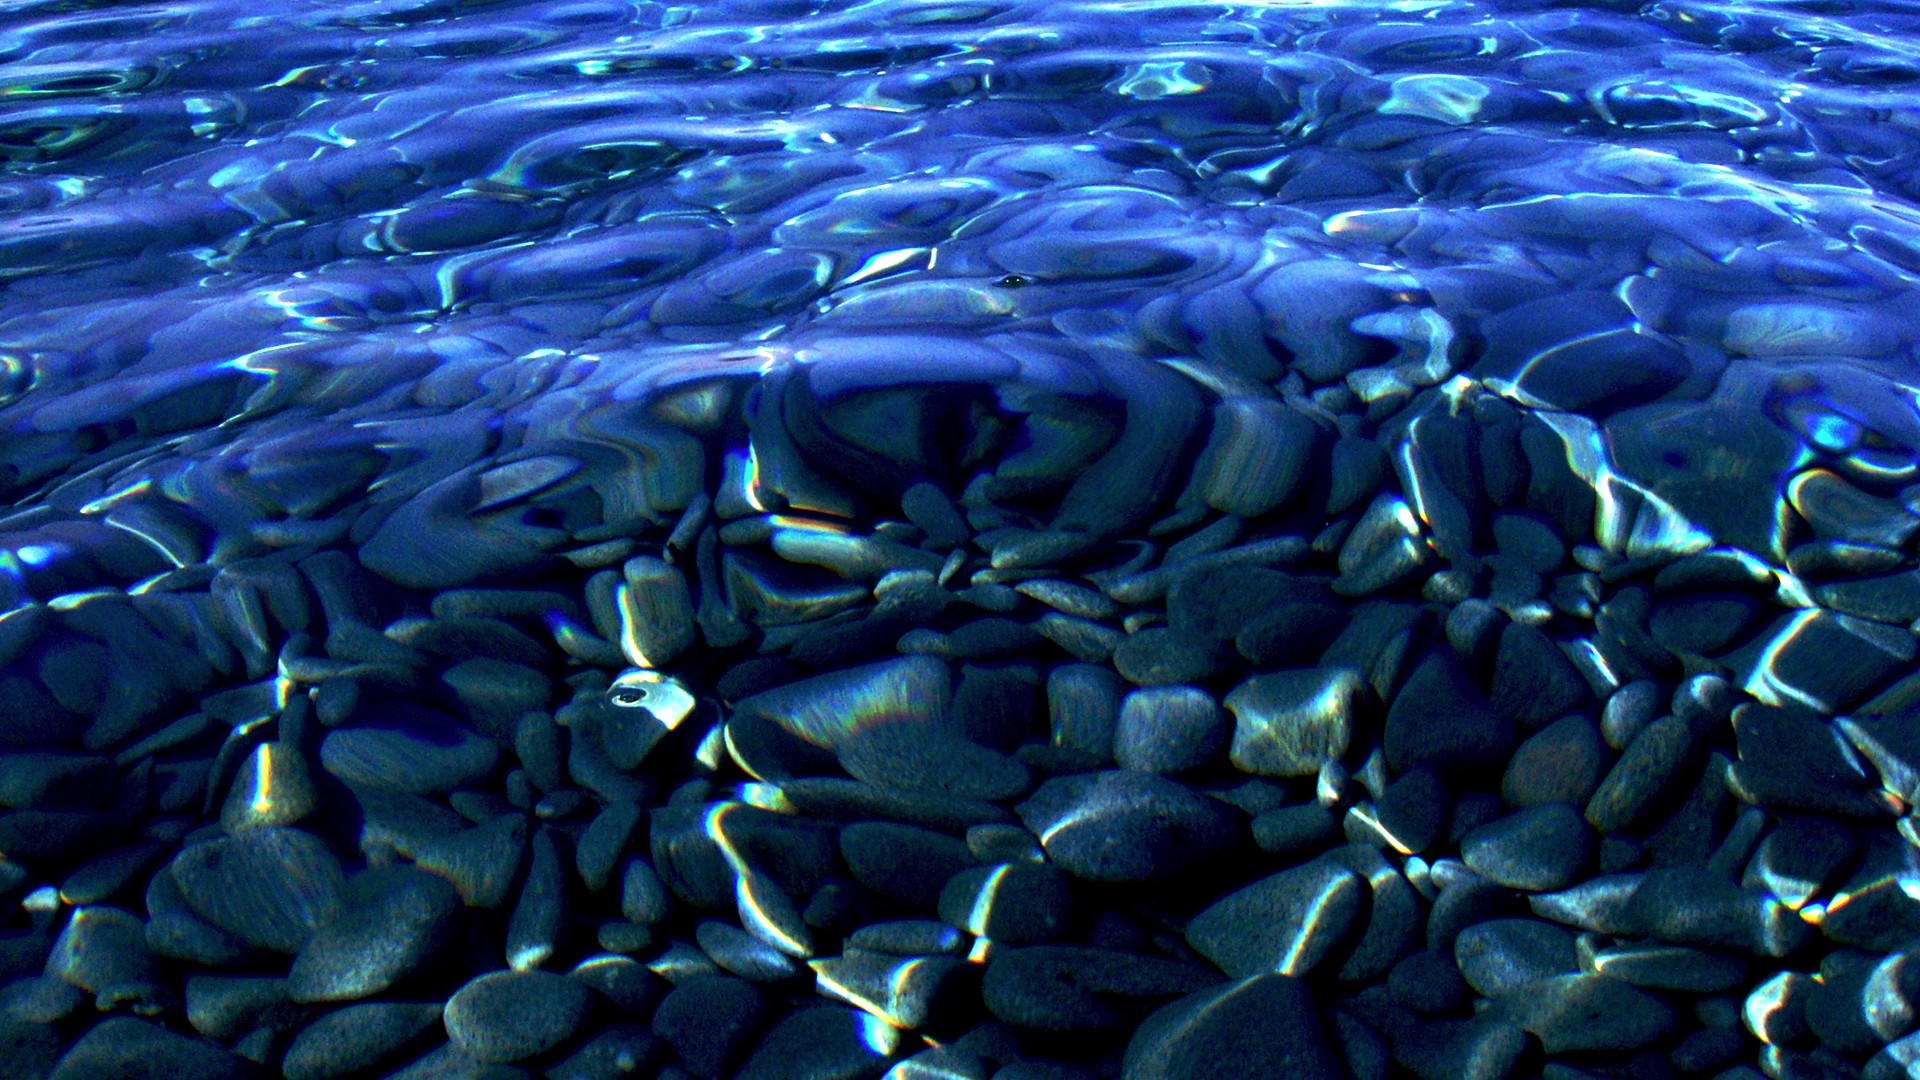 Stones In Water Wallpaper High Quality